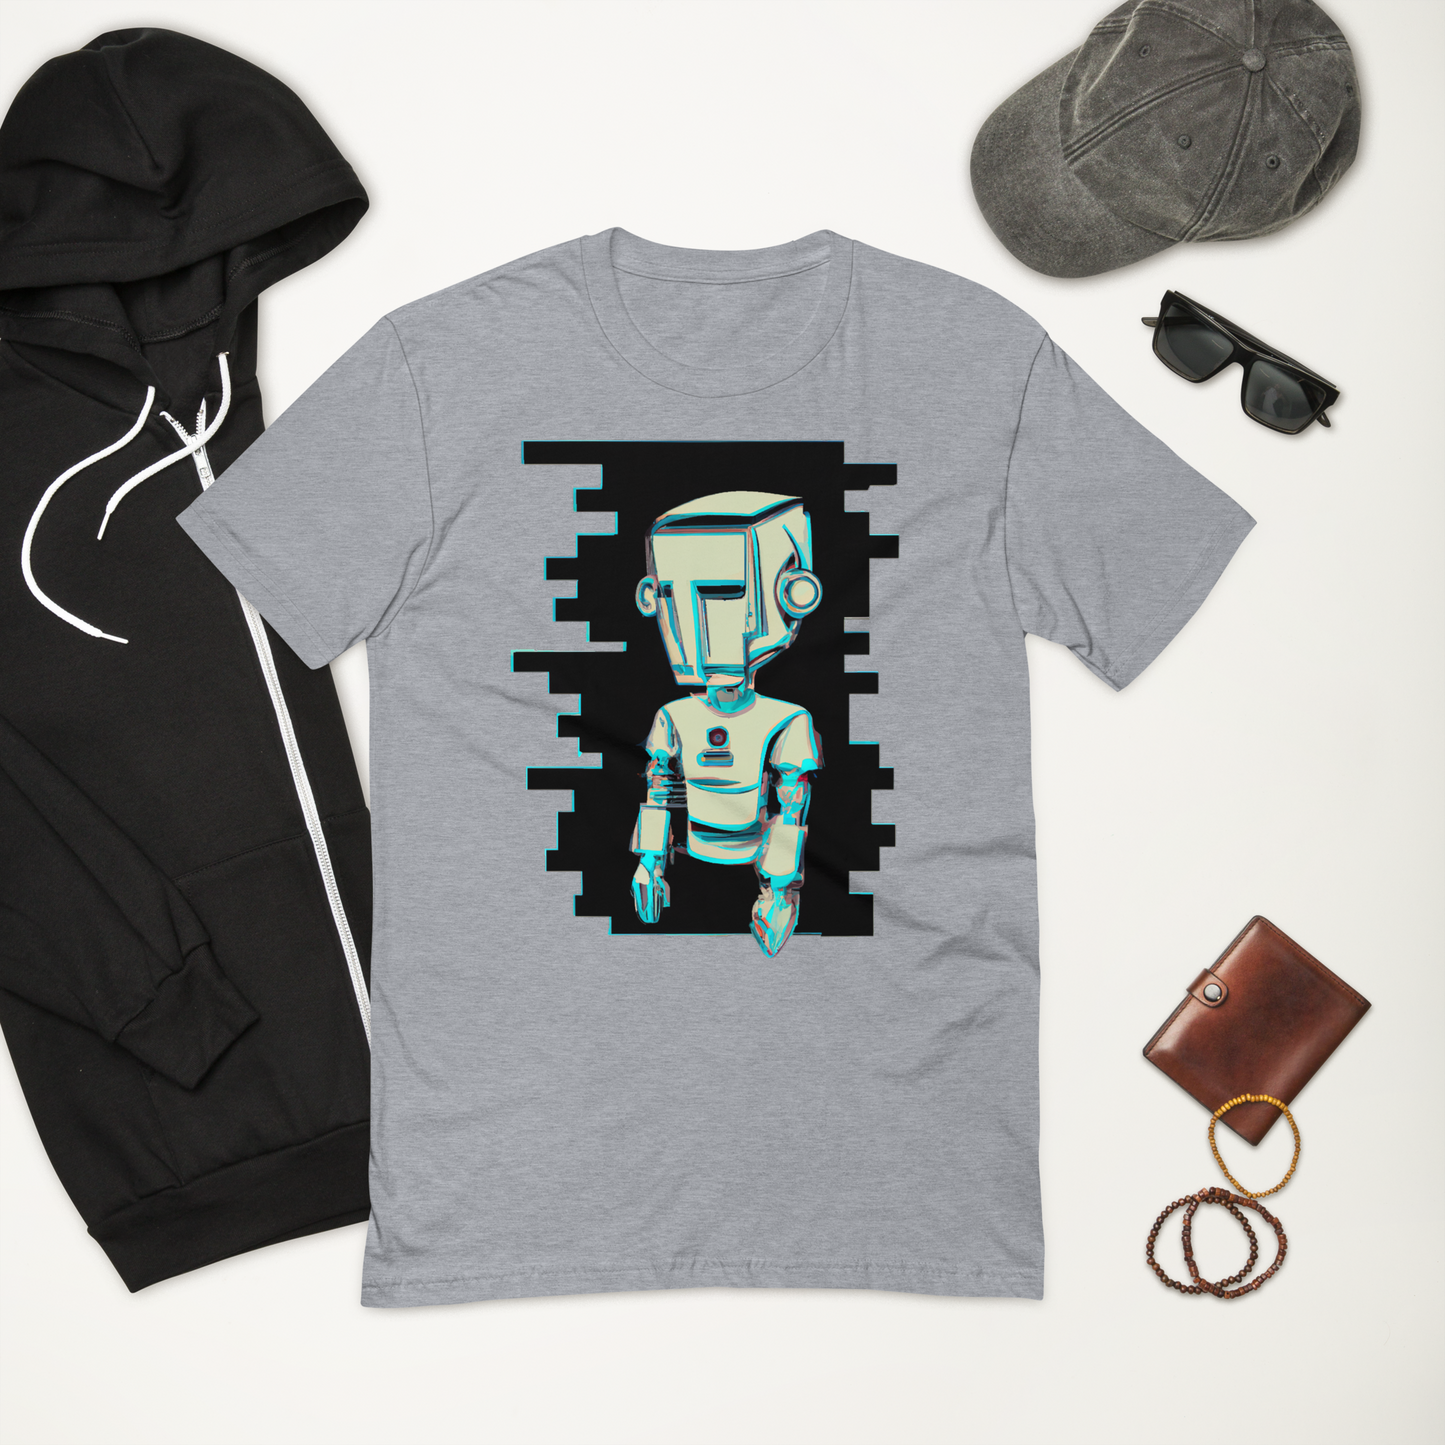 SOULED OUT "Sad Robot 1" Fitted T-shirt